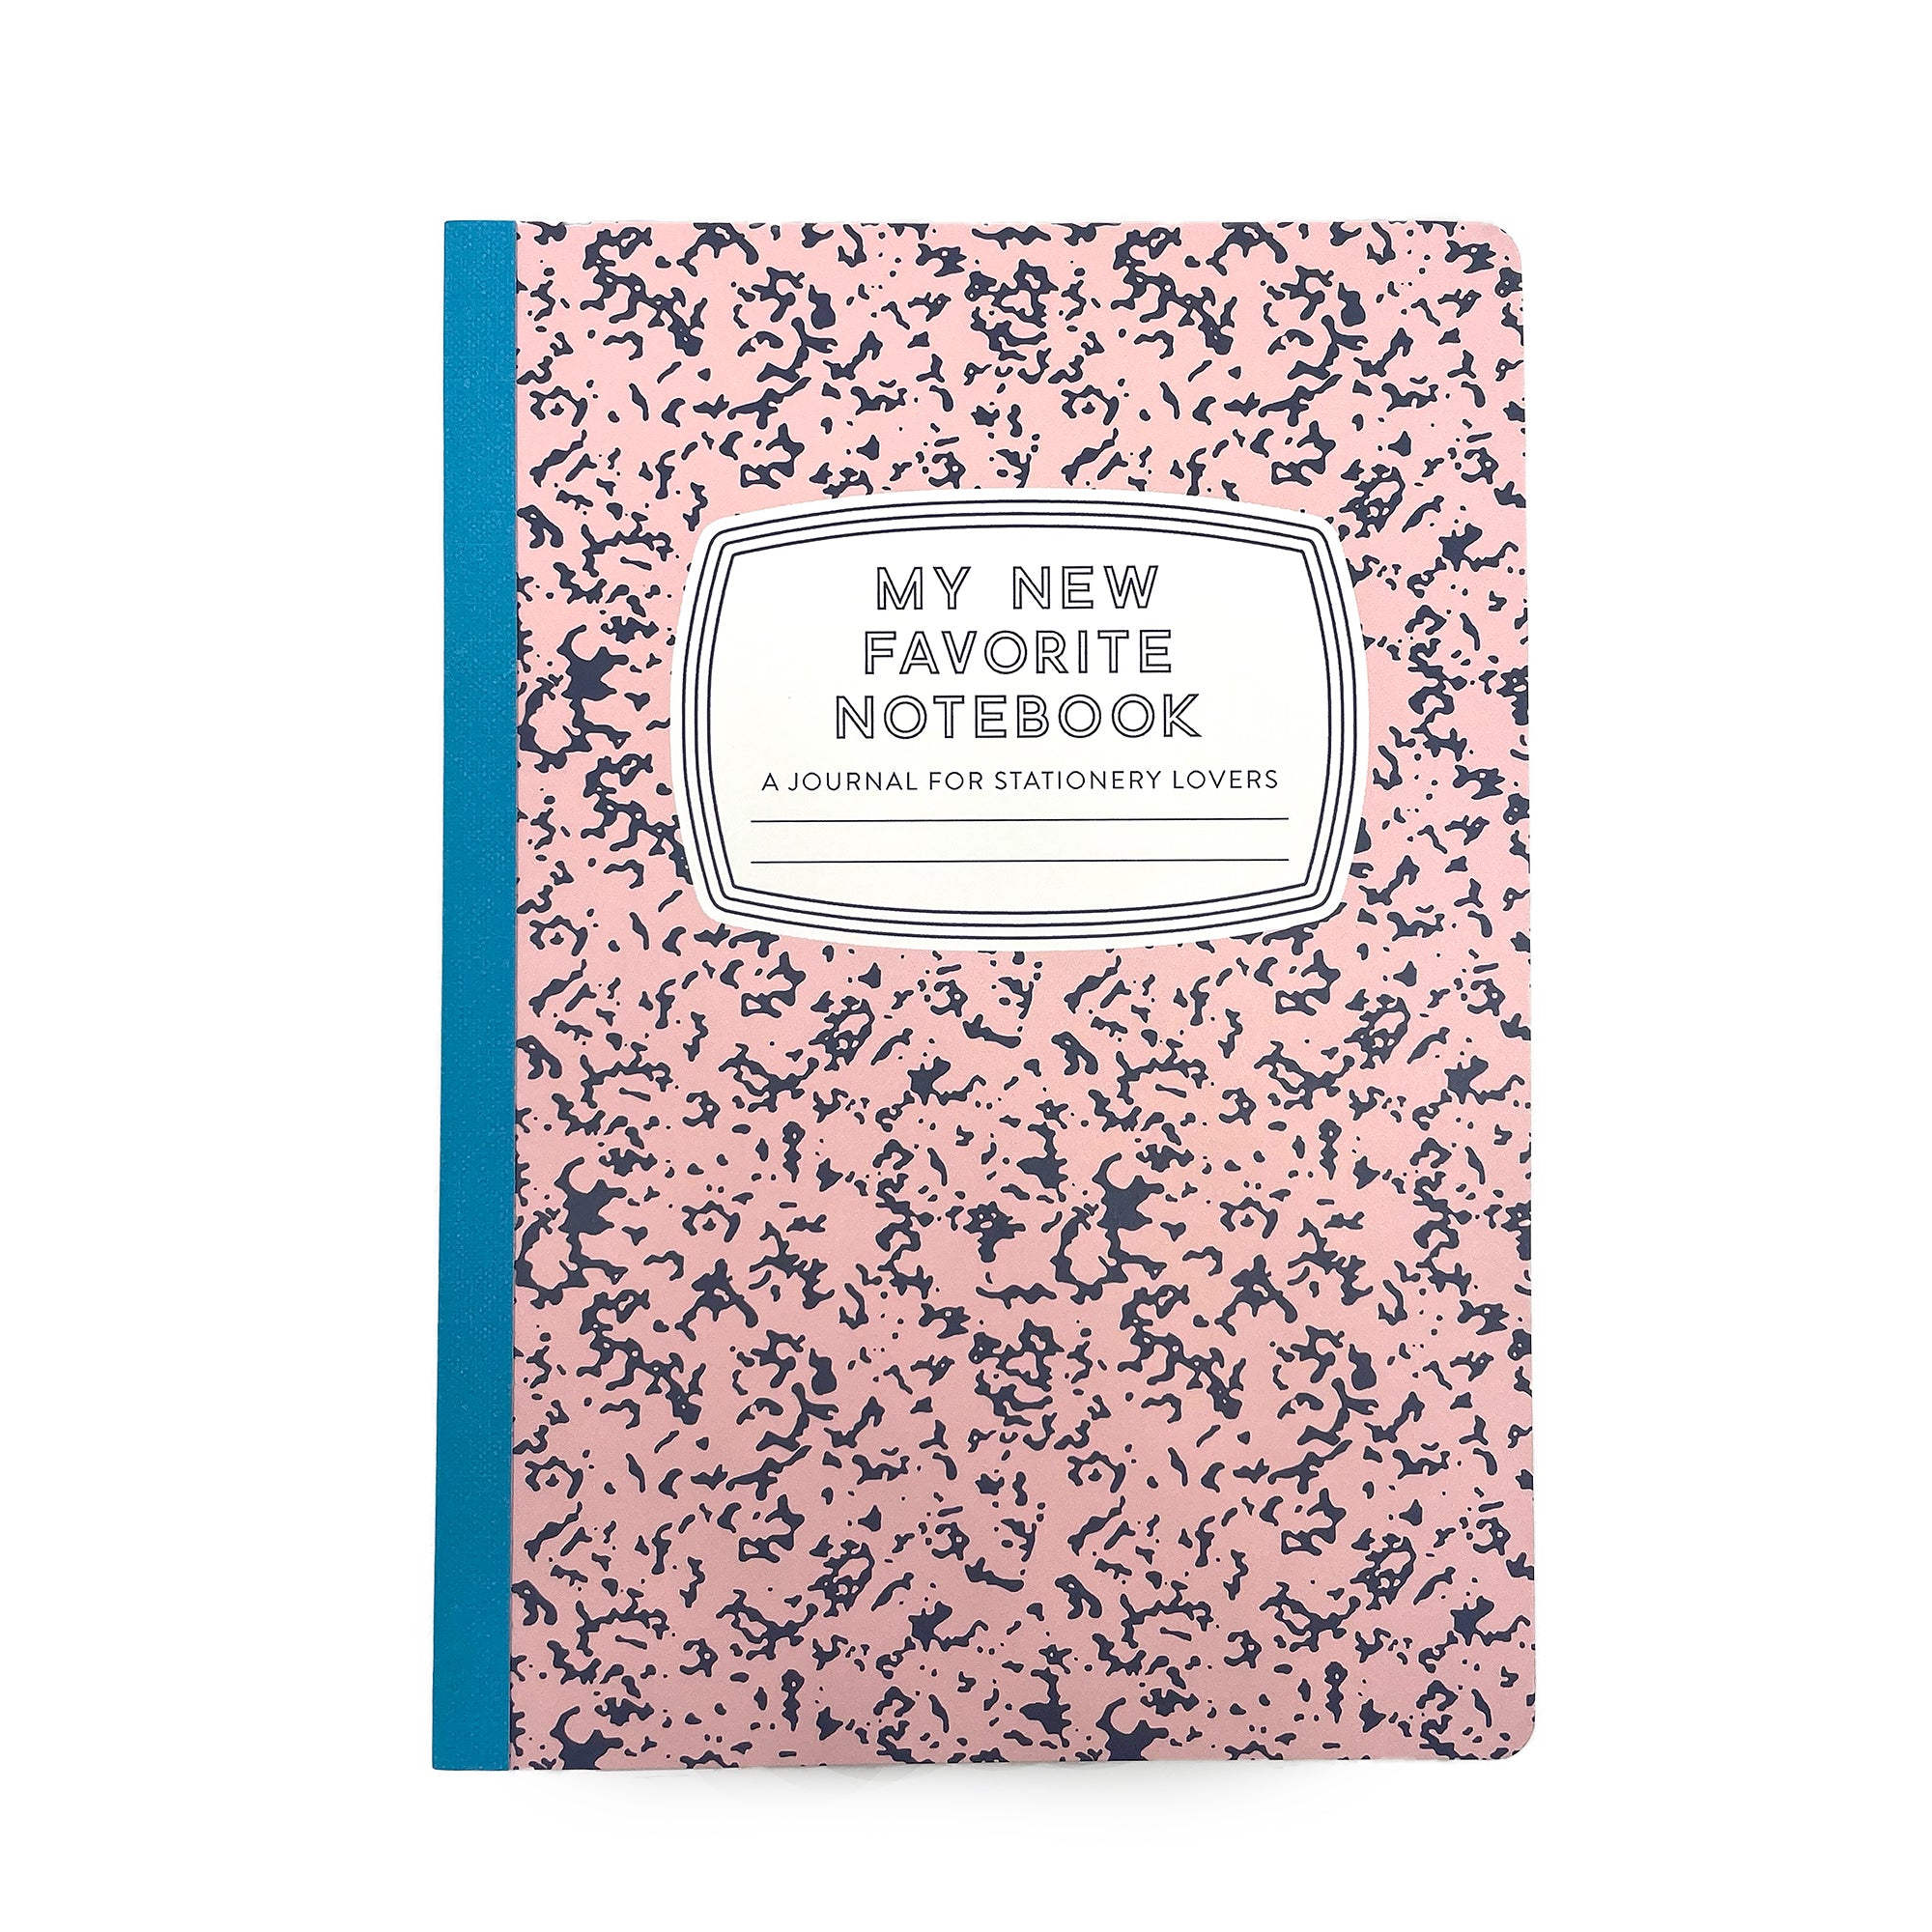 My New Favorite Notebook: A Journal for Stationery Lovers